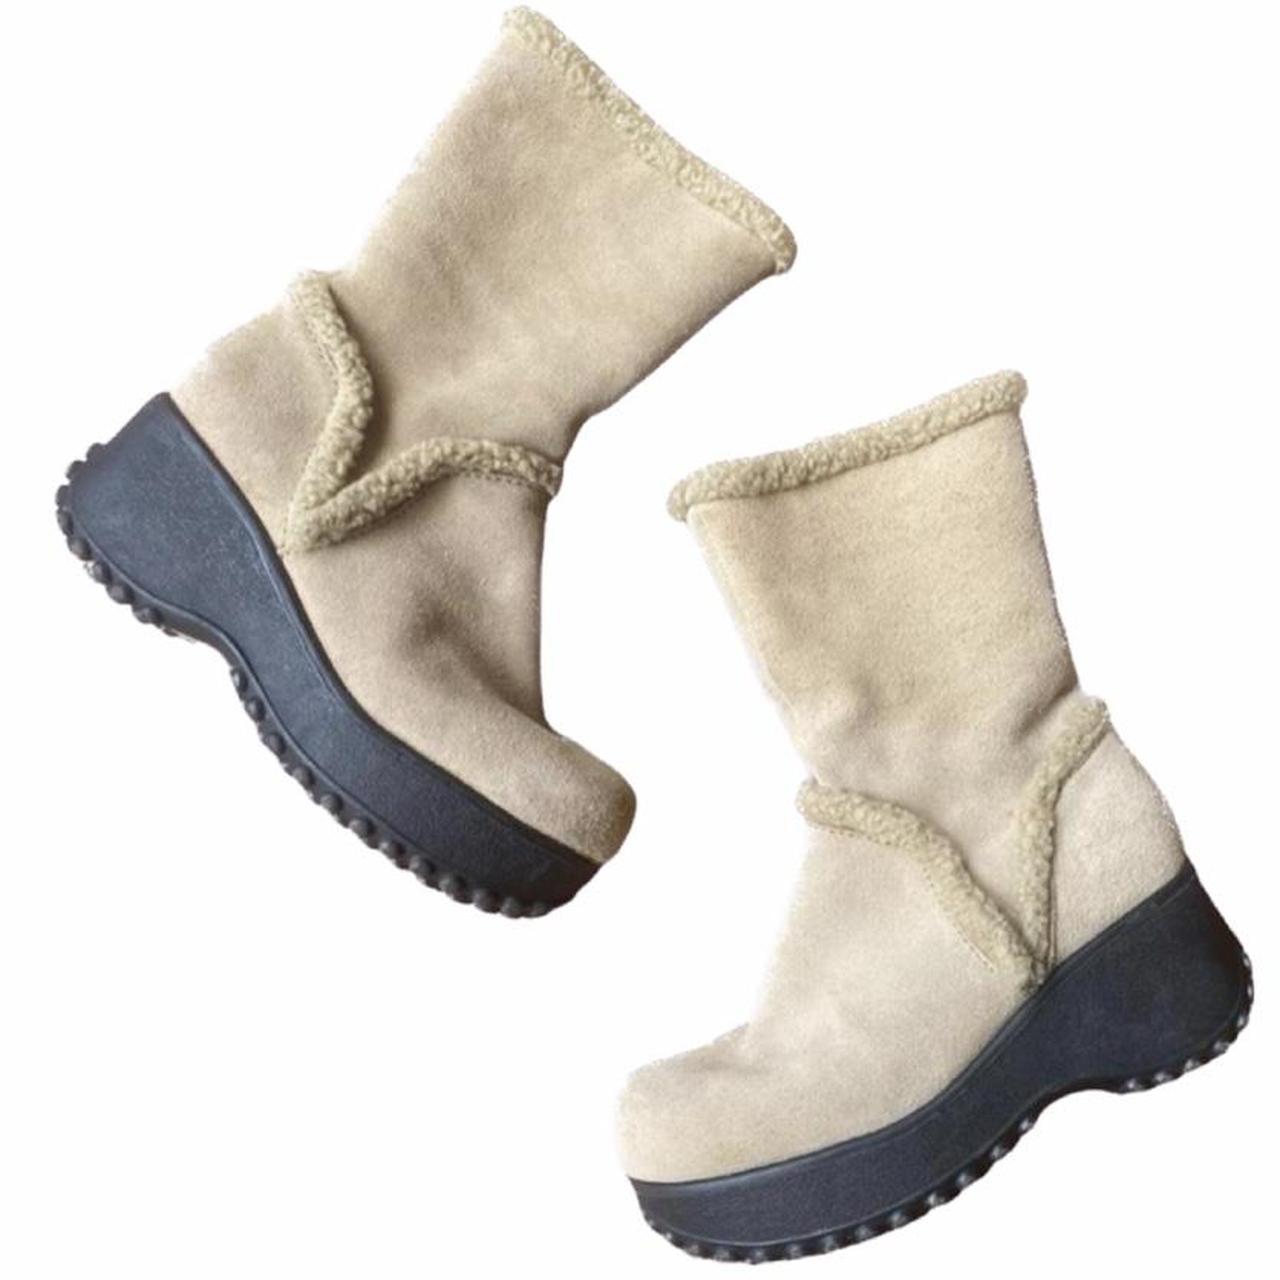 Product Image 1 - Chunky y2k platform suede boots
——————
-In